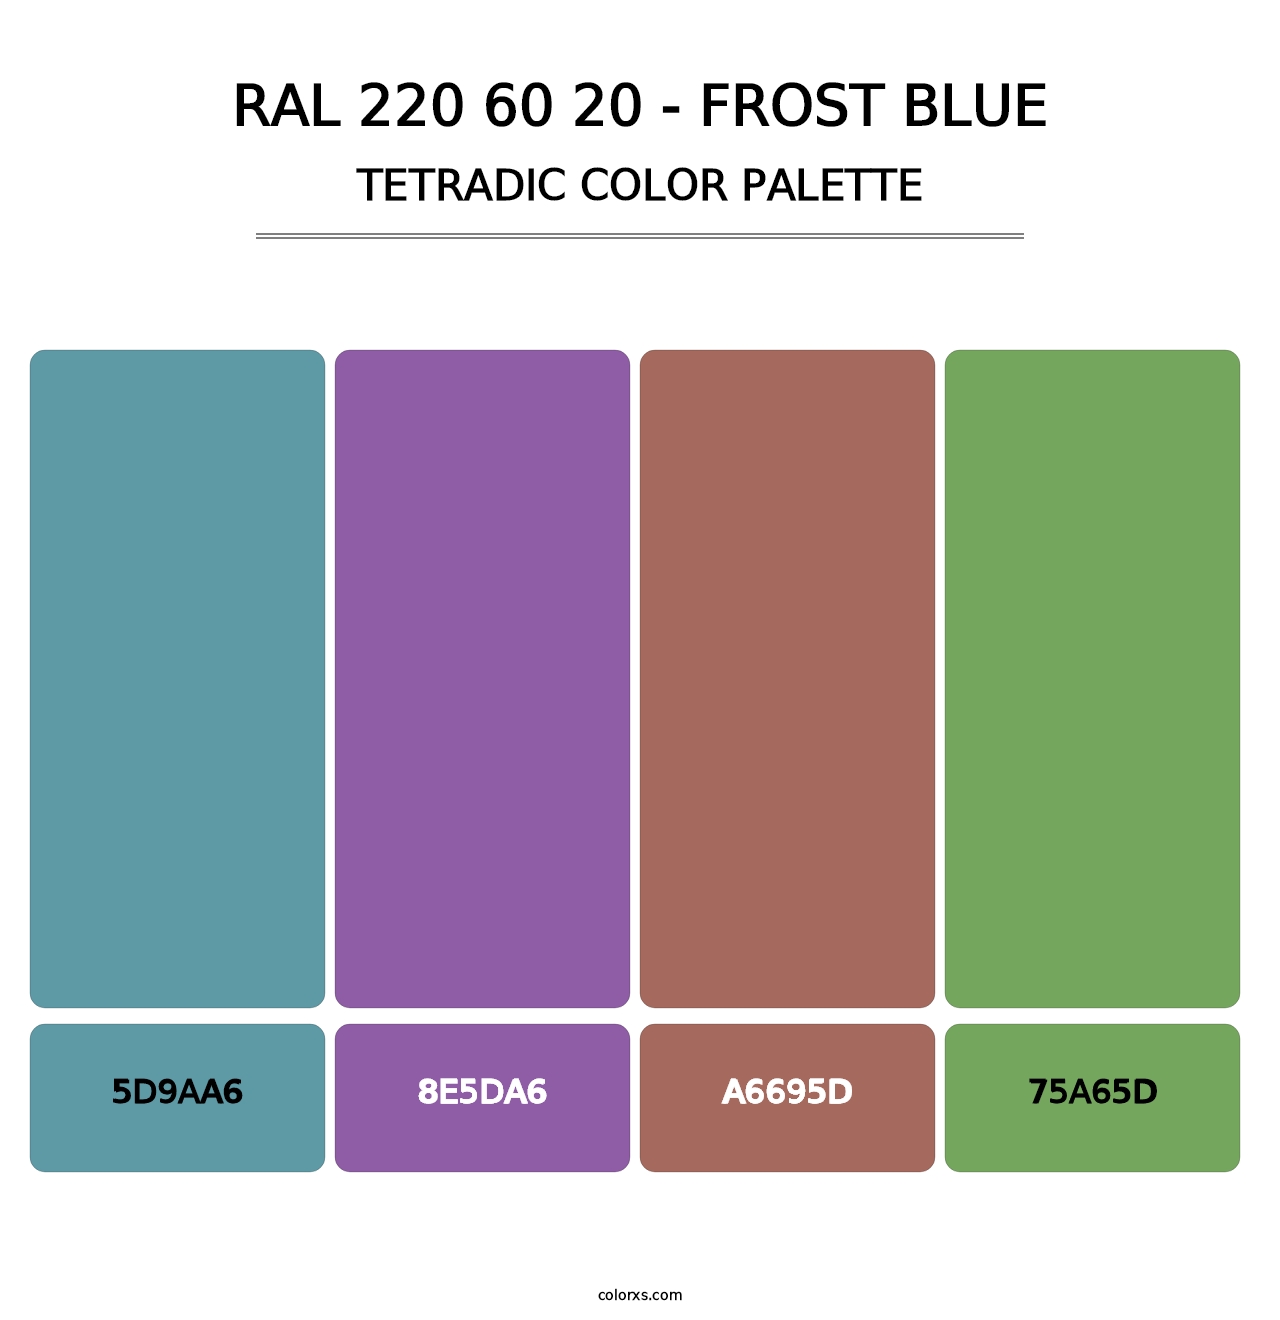 RAL 220 60 20 - Frost Blue - Tetradic Color Palette